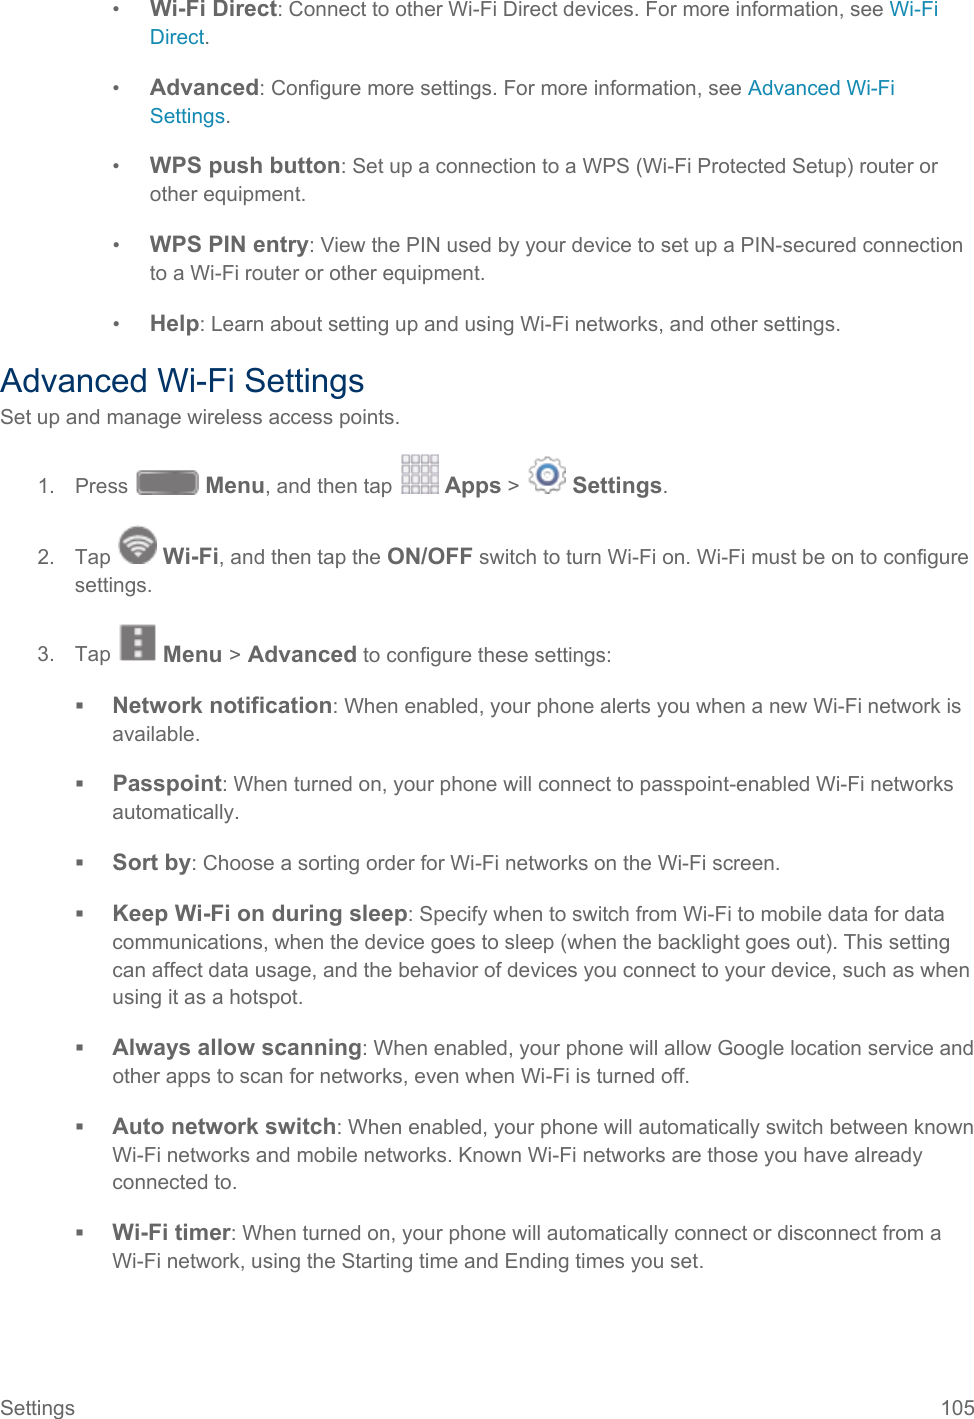  •  Wi-Fi Direct: Connect to other Wi-Fi Direct devices. For more information, see Wi-Fi Direct. •  Advanced: Configure more settings. For more information, see Advanced Wi-Fi Settings. •  WPS push button: Set up a connection to a WPS (Wi-Fi Protected Setup) router or other equipment. •  WPS PIN entry: View the PIN used by your device to set up a PIN-secured connection to a Wi-Fi router or other equipment. •  Help: Learn about setting up and using Wi-Fi networks, and other settings. Advanced Wi-Fi Settings Set up and manage wireless access points. 1. Press   Menu, and then tap   Apps &gt;   Settings.  2. Tap   Wi-Fi, and then tap the ON/OFF switch to turn Wi-Fi on. Wi-Fi must be on to configure settings. 3. Tap   Menu &gt; Advanced to configure these settings:  Network notification: When enabled, your phone alerts you when a new Wi-Fi network is available.  Passpoint: When turned on, your phone will connect to passpoint-enabled Wi-Fi networks automatically.  Sort by: Choose a sorting order for Wi-Fi networks on the Wi-Fi screen.  Keep Wi-Fi on during sleep: Specify when to switch from Wi-Fi to mobile data for data communications, when the device goes to sleep (when the backlight goes out). This setting can affect data usage, and the behavior of devices you connect to your device, such as when using it as a hotspot.  Always allow scanning: When enabled, your phone will allow Google location service and other apps to scan for networks, even when Wi-Fi is turned off.  Auto network switch: When enabled, your phone will automatically switch between known Wi-Fi networks and mobile networks. Known Wi-Fi networks are those you have already connected to.  Wi-Fi timer: When turned on, your phone will automatically connect or disconnect from a Wi-Fi network, using the Starting time and Ending times you set. Settings 105   